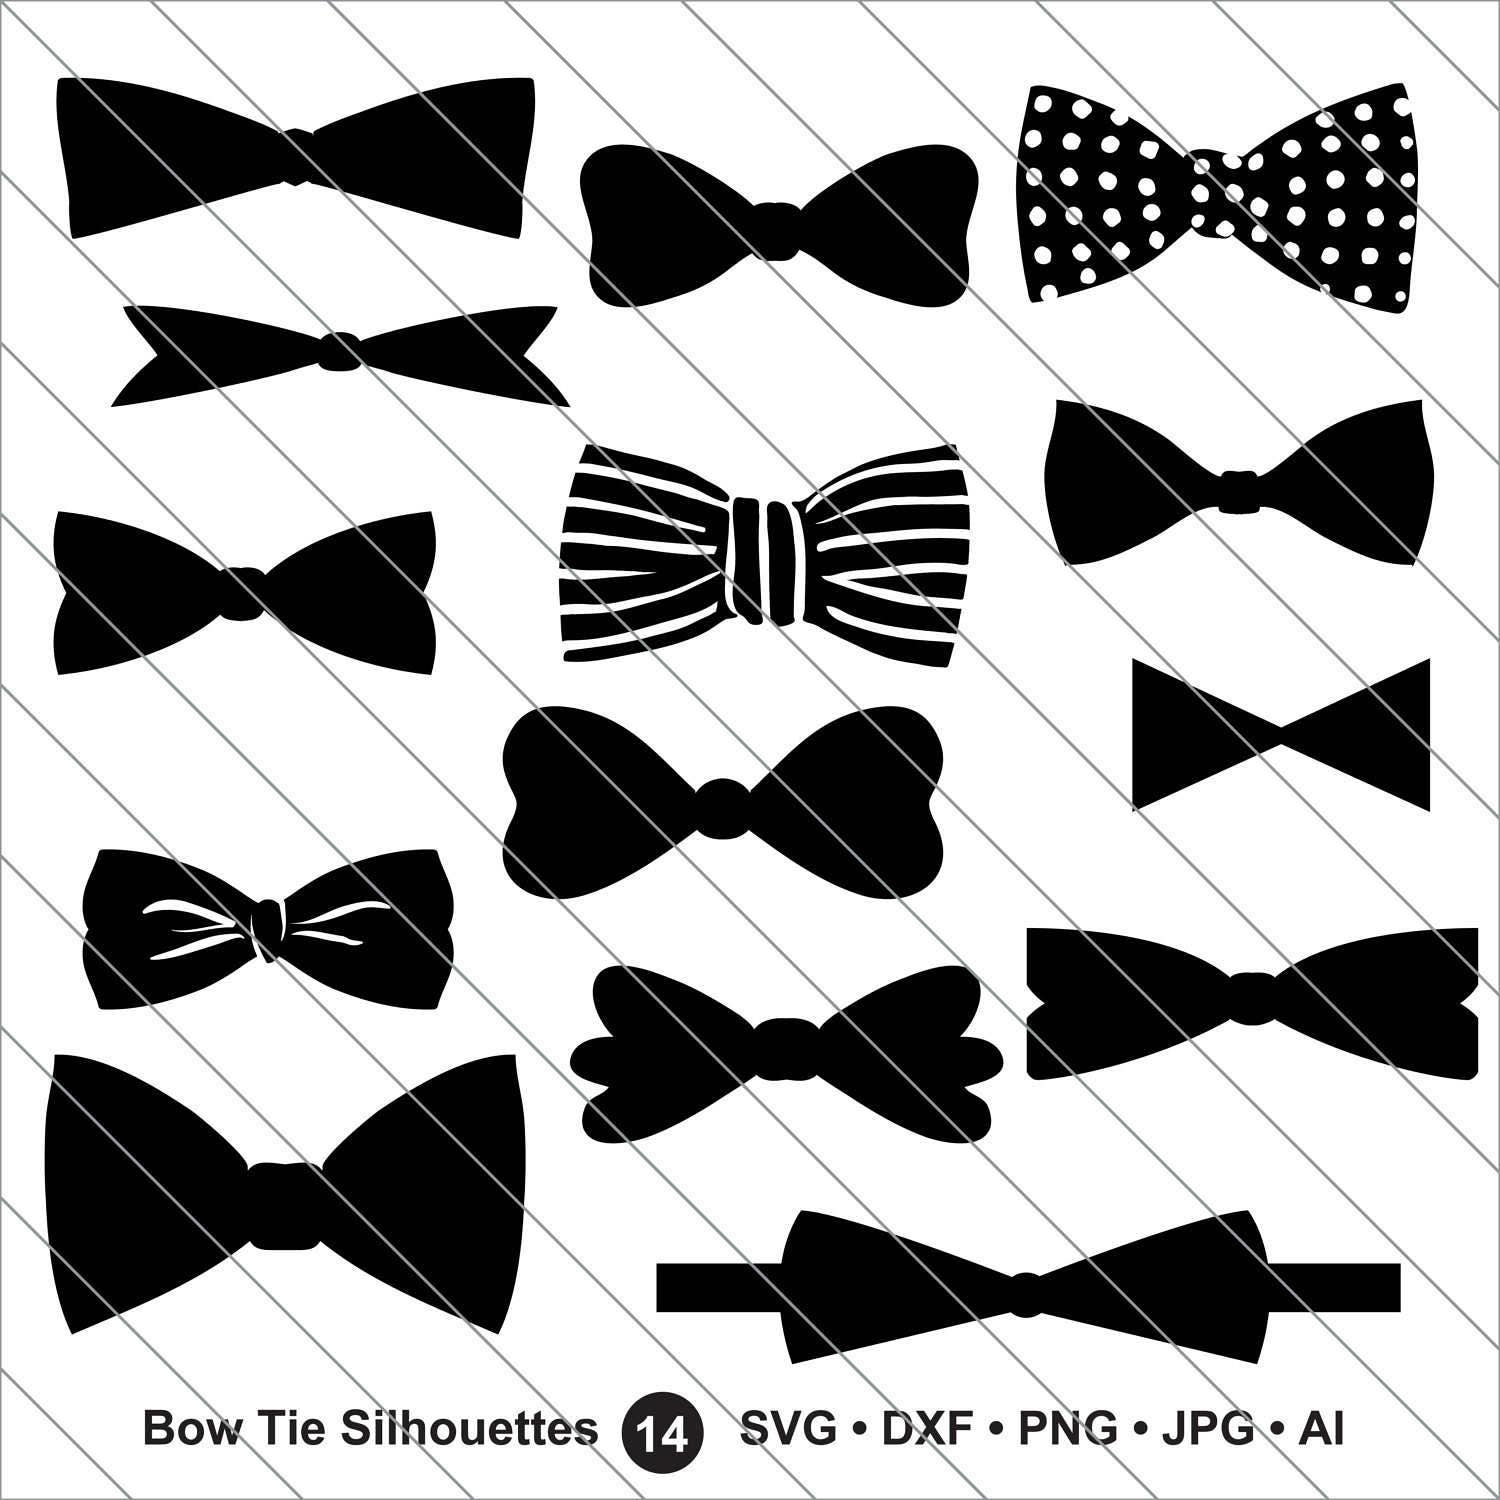 Download Bow Tie Silhouettes SVG bow tie clipartBow Tie Svg Cut